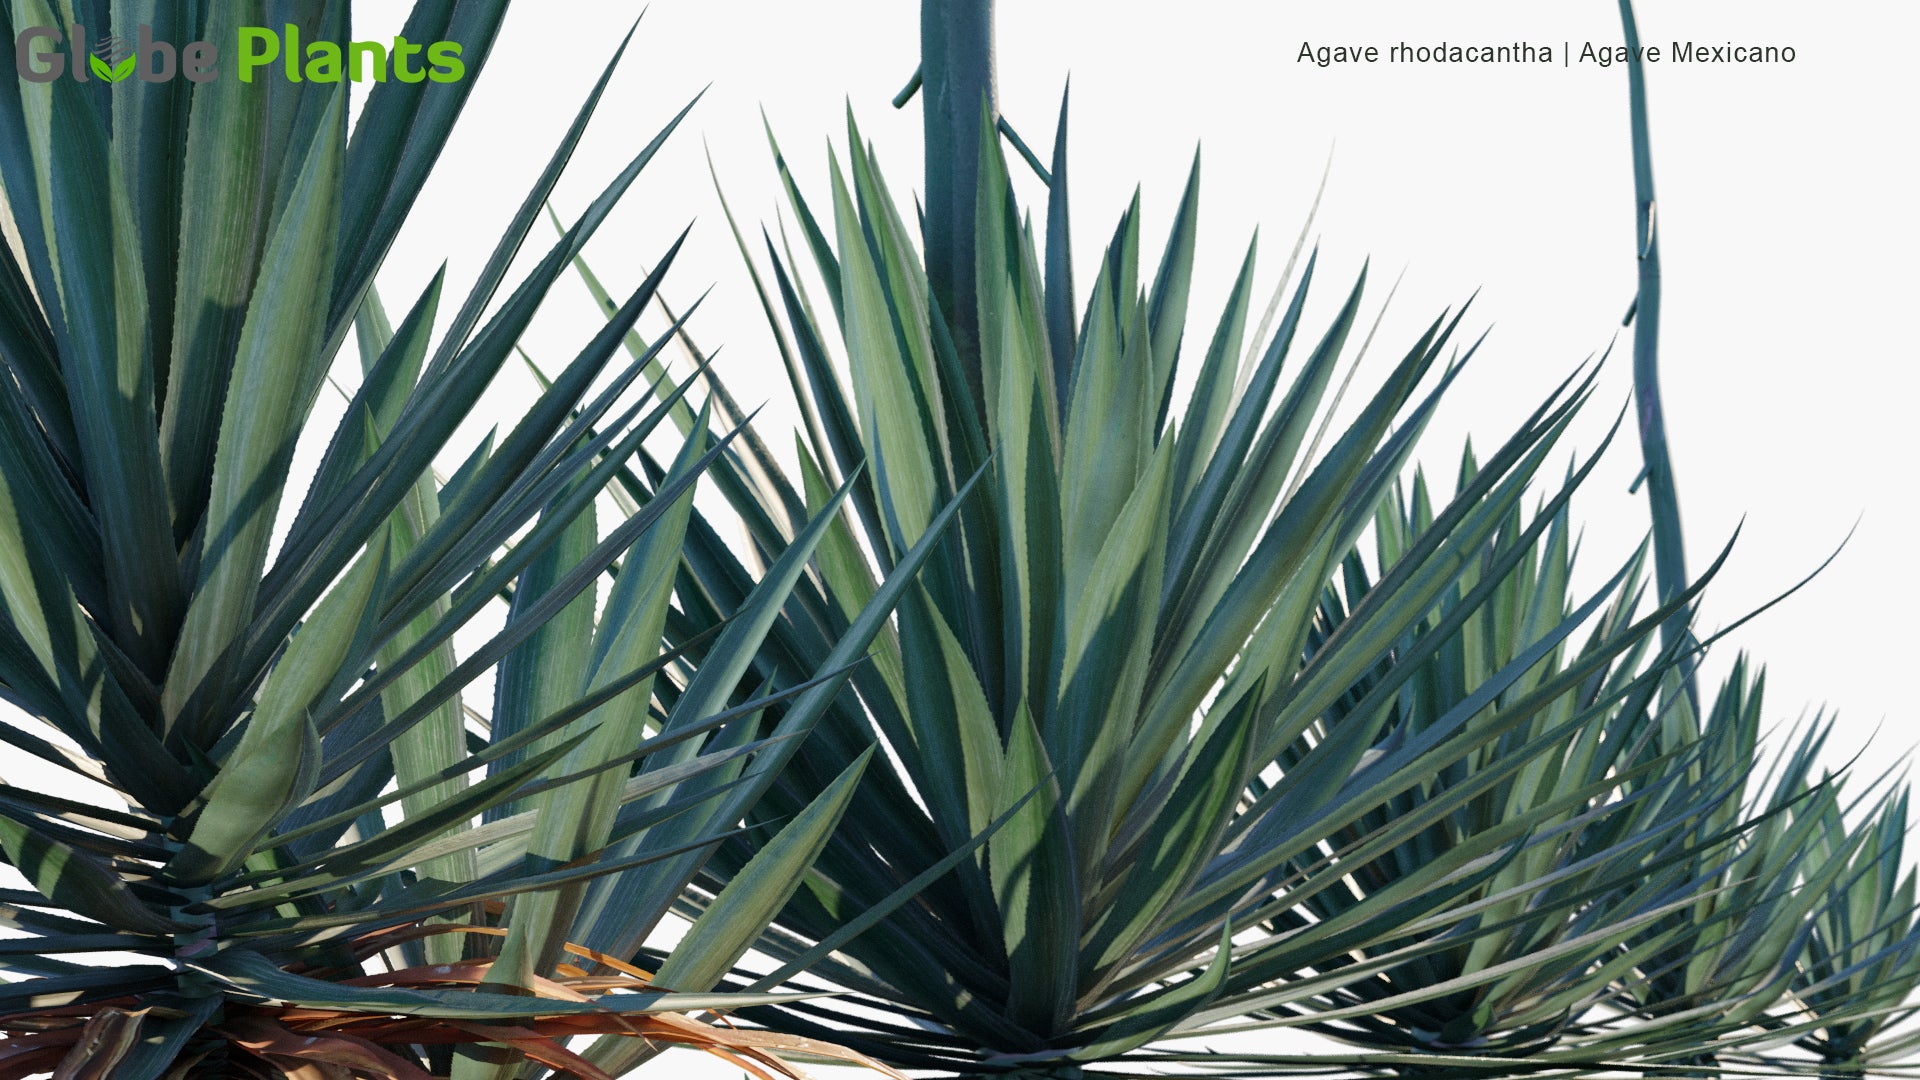 Low Poly Agave Rhodacantha - Agave Mexicano (3D Model)